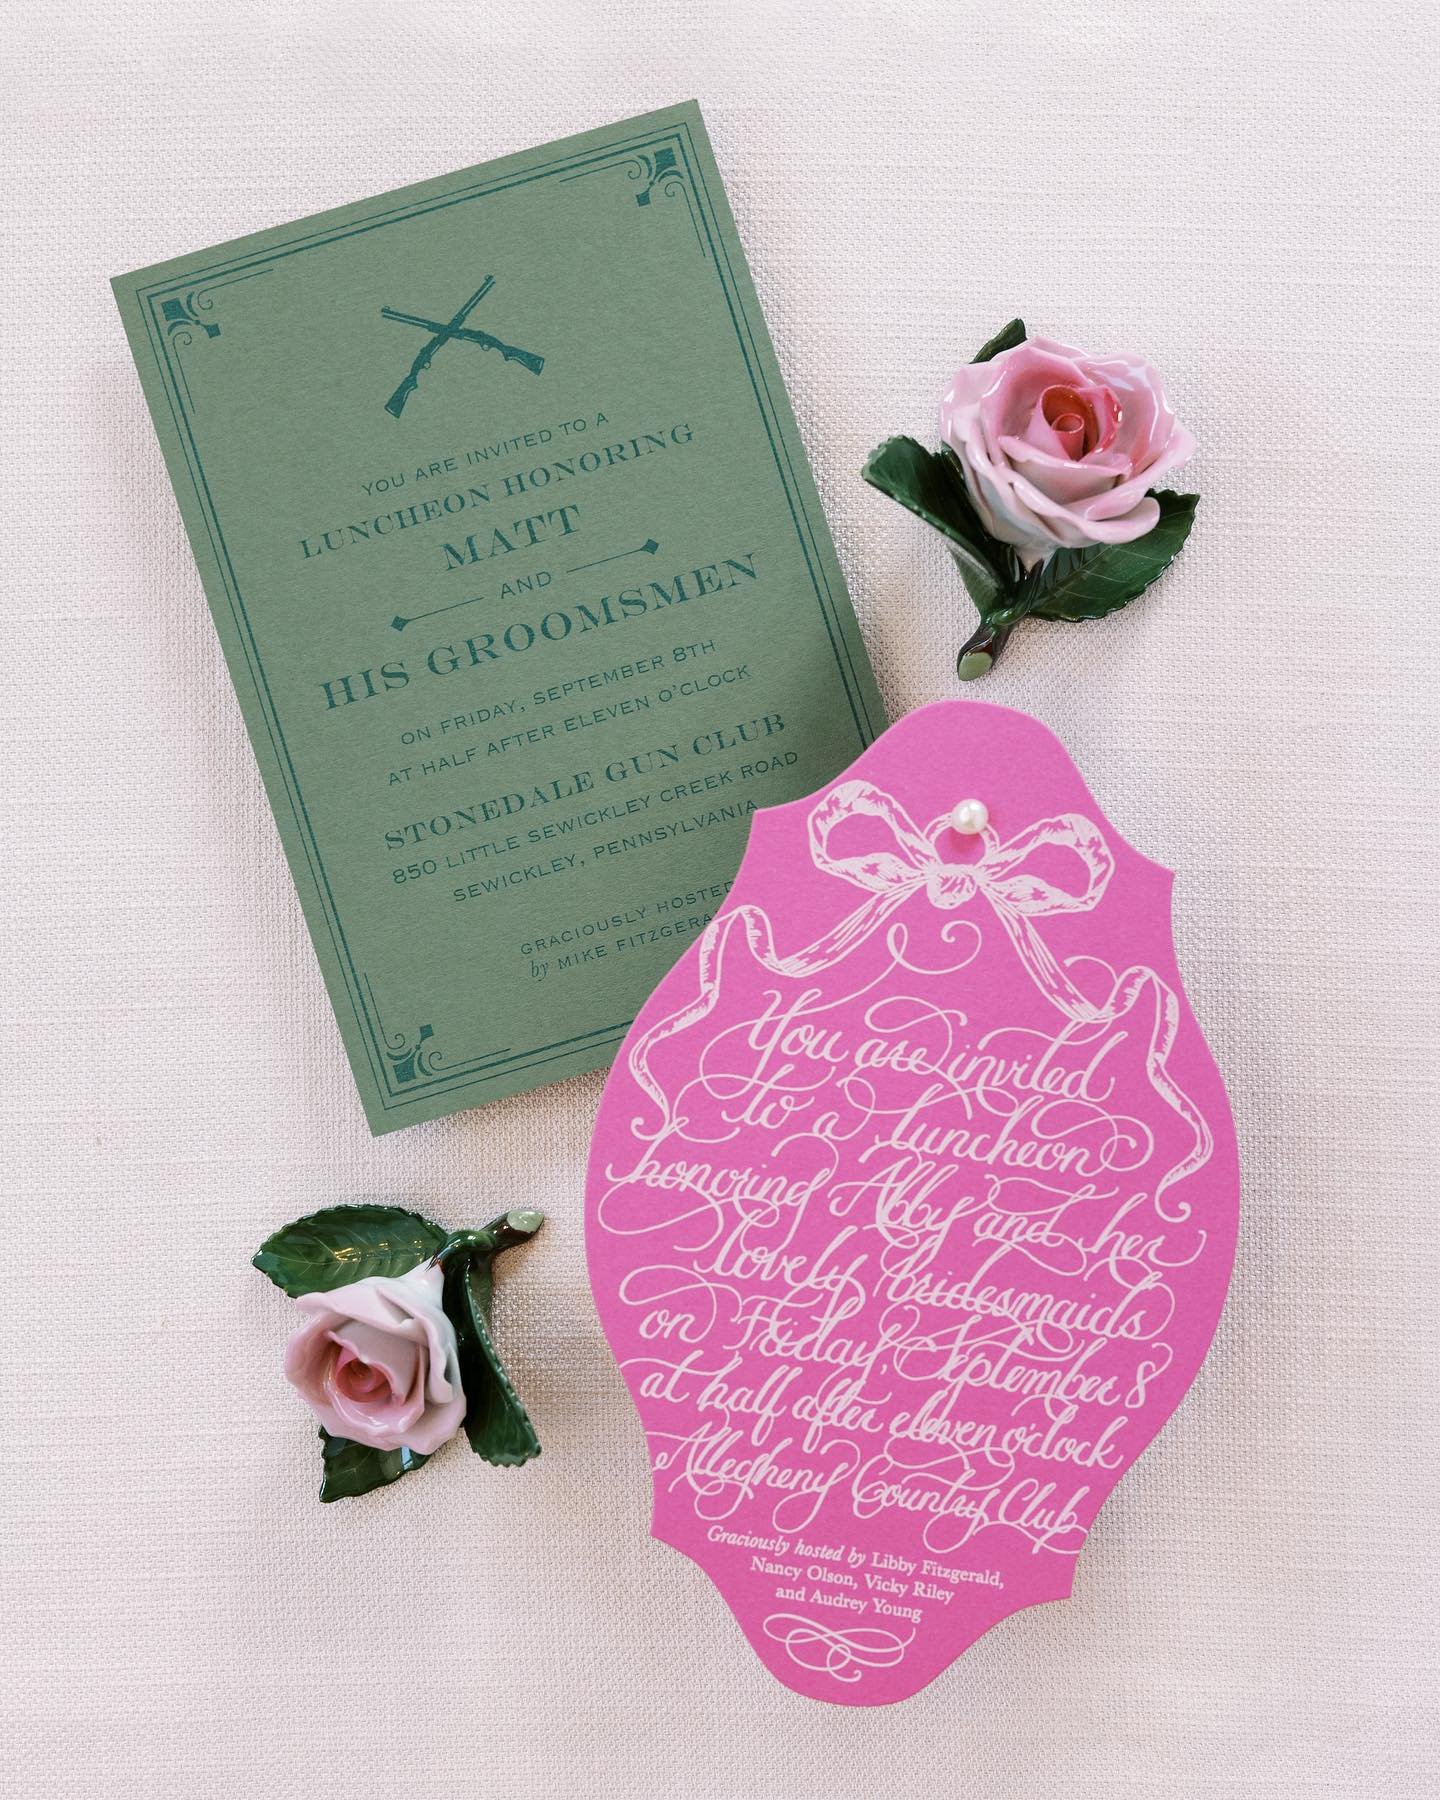 How fun are these groomsmen and bridesmaids&rsquo; luncheon invites?! We love designing and creating for every part of your wedding celebration 💗

Planning @soireebysouleret
Photography @laurenreneephoto

#karaanne_paper #luxurywedding #luxuryweddin